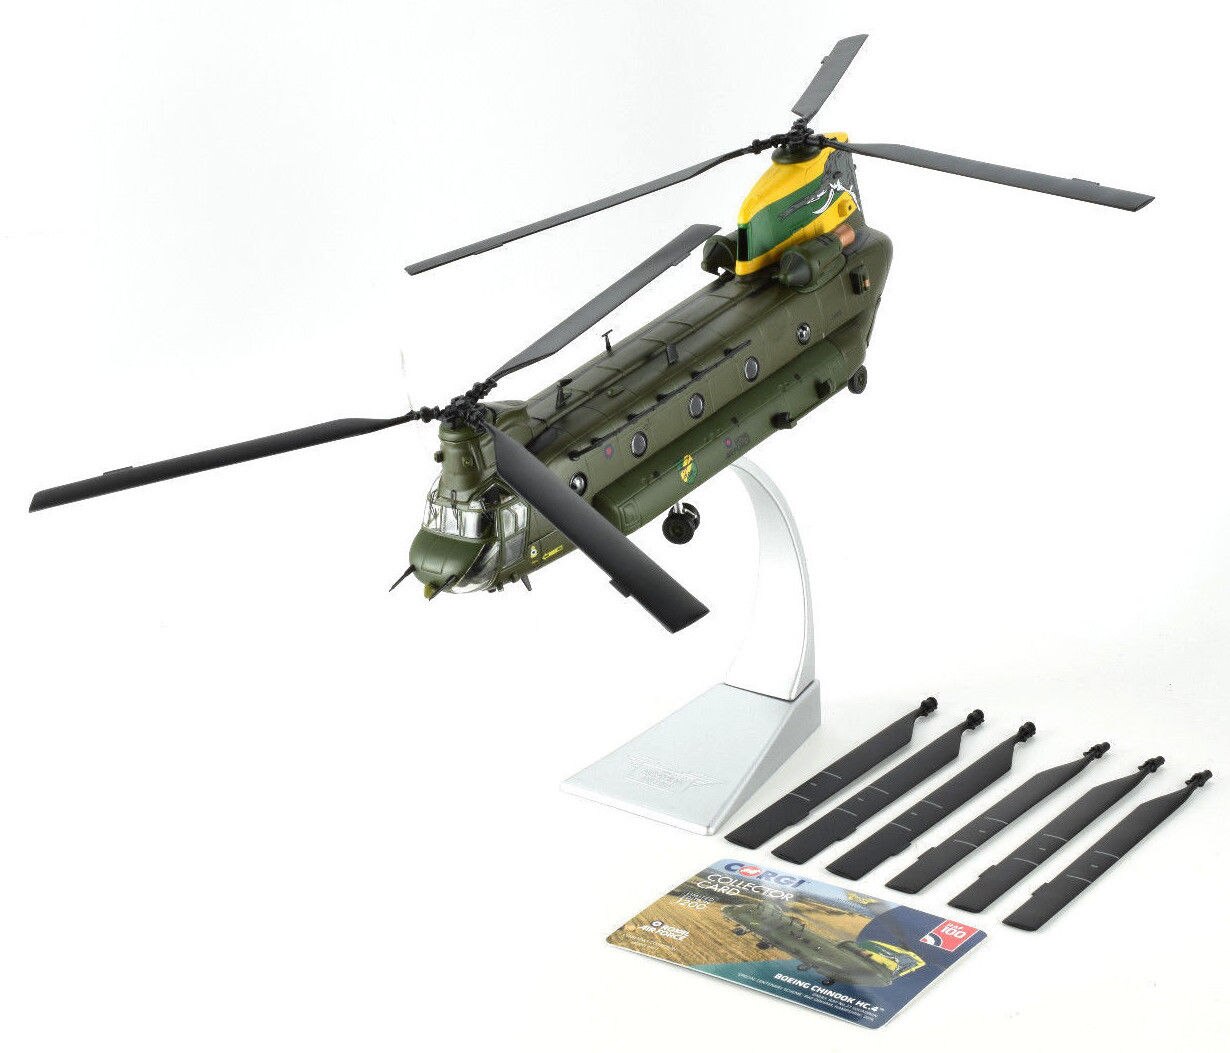 1/72 Alloy Cast CH-47 Chinook Heavy Helicopter Model - Authentic Military Aviation Replica!